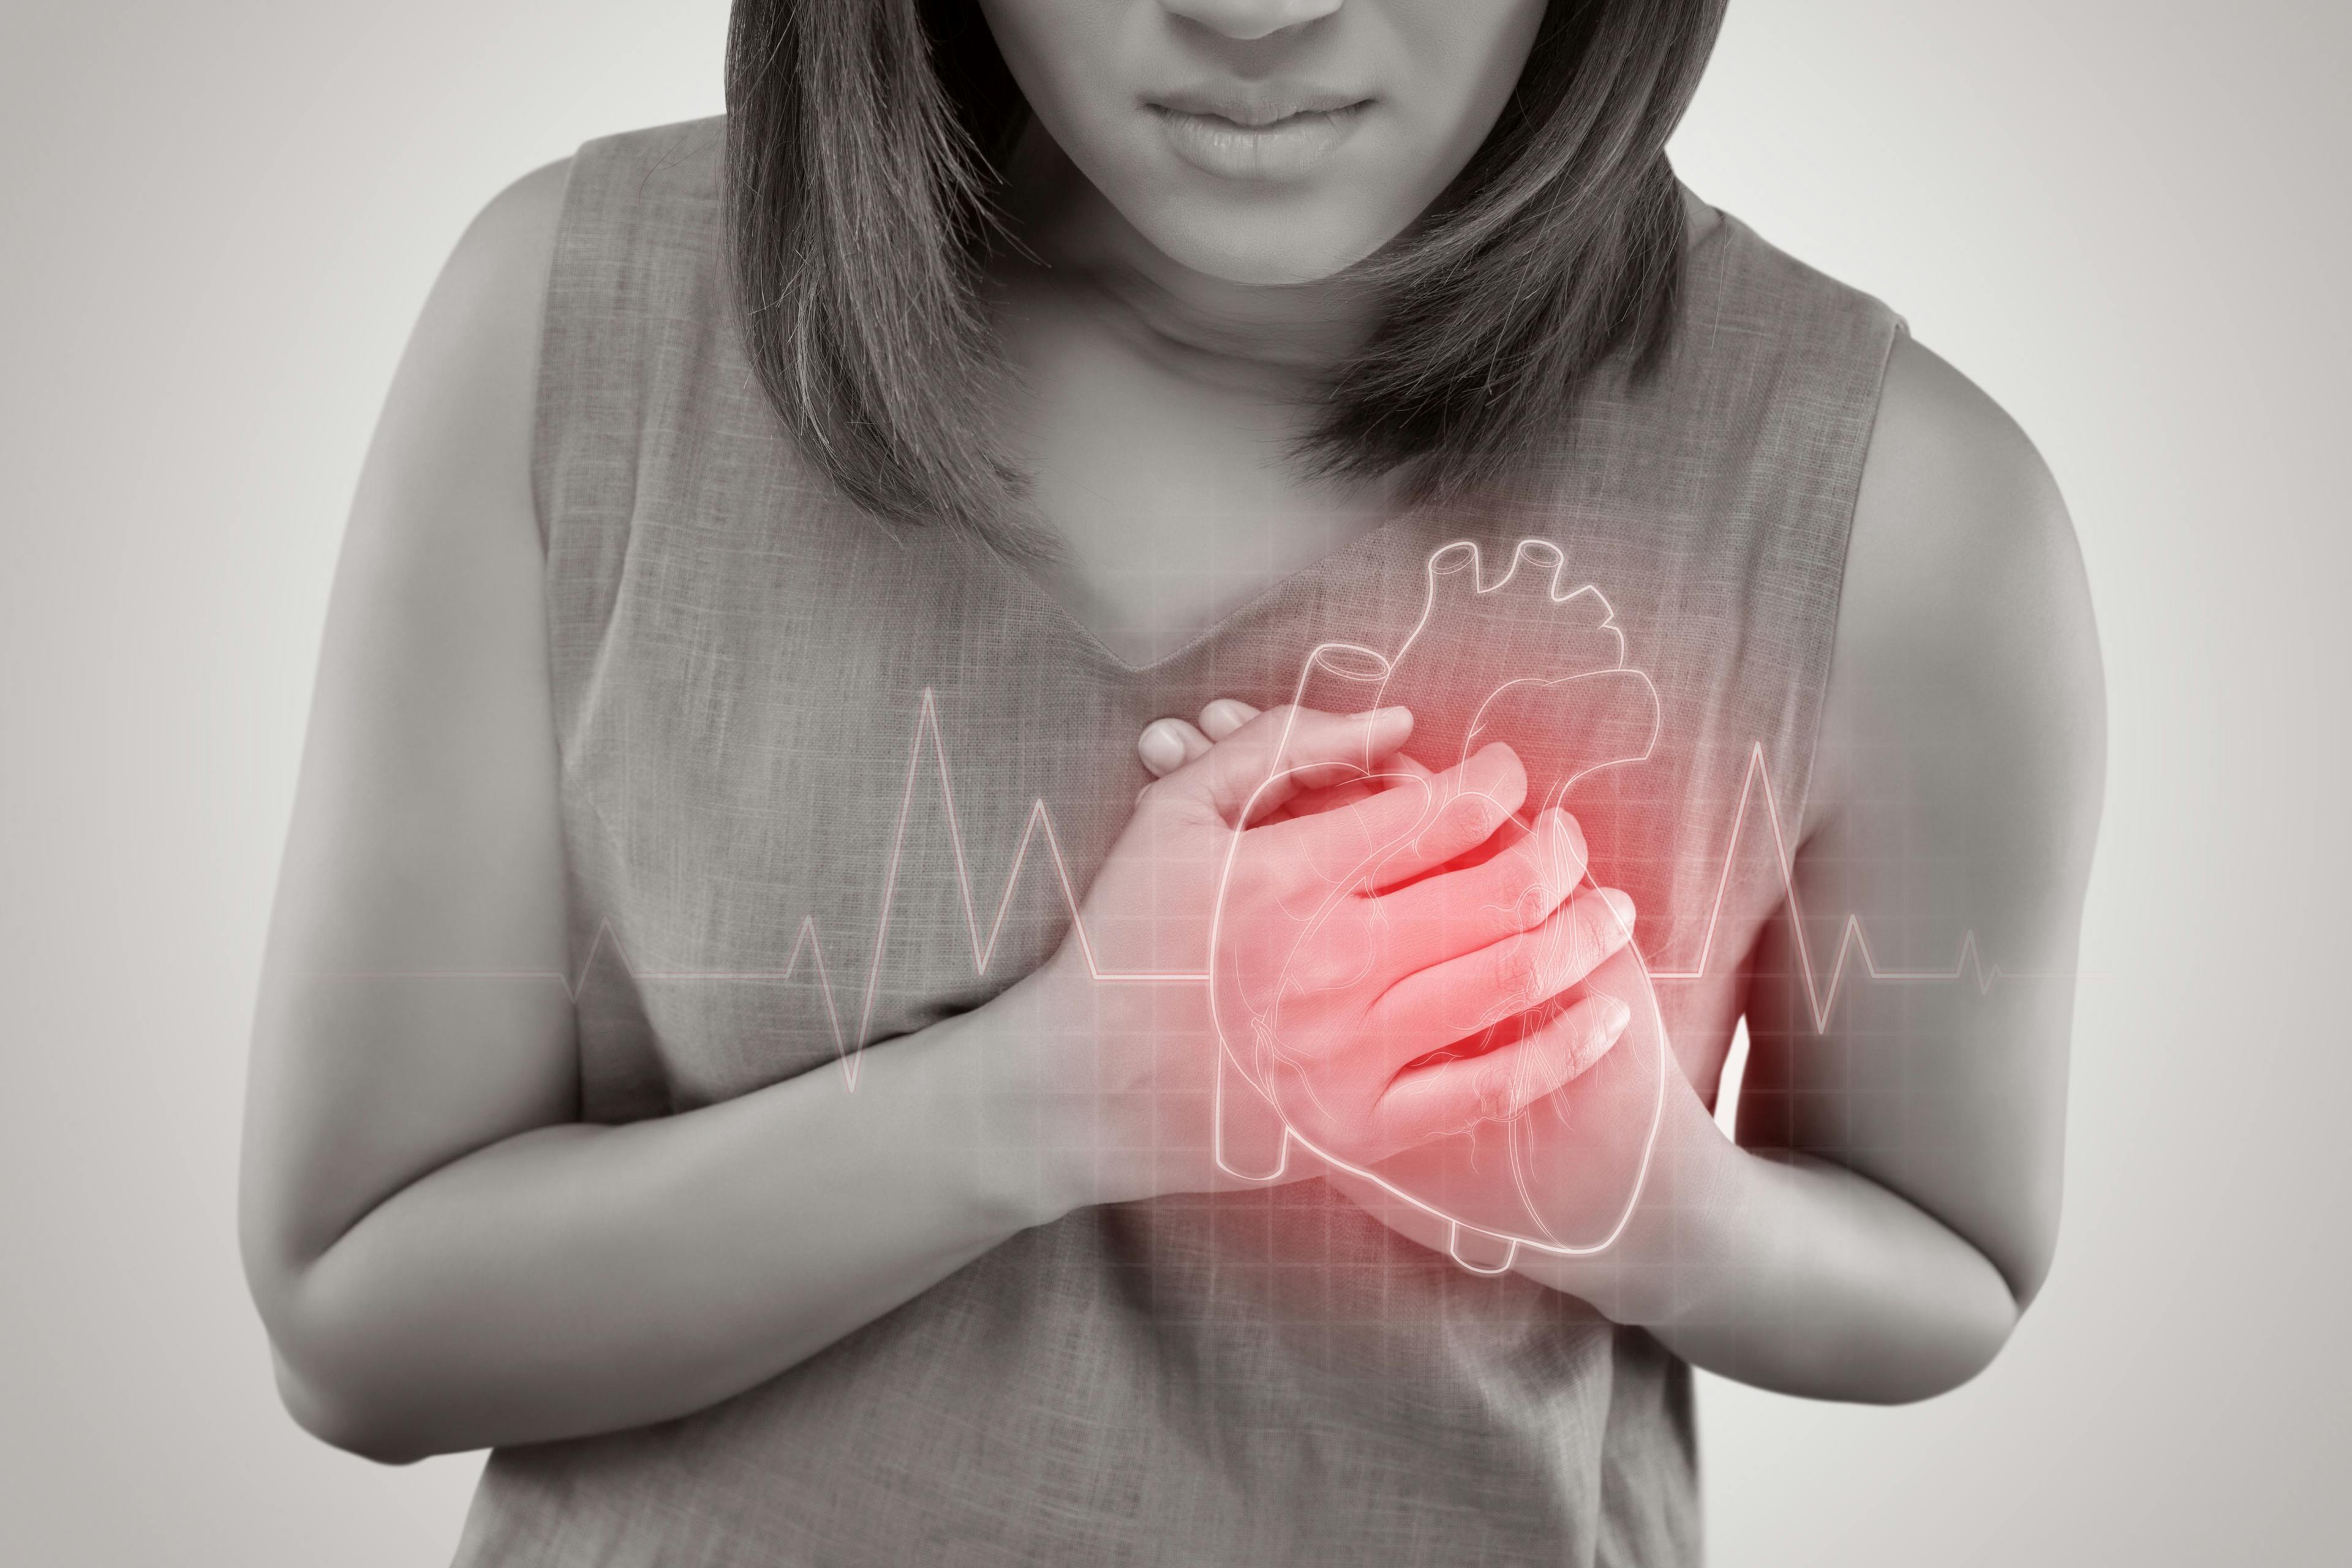 The women has heart disease and go to hospital urgent. People with heart problem concept | Image Credit: eddows - adobe.stock.com